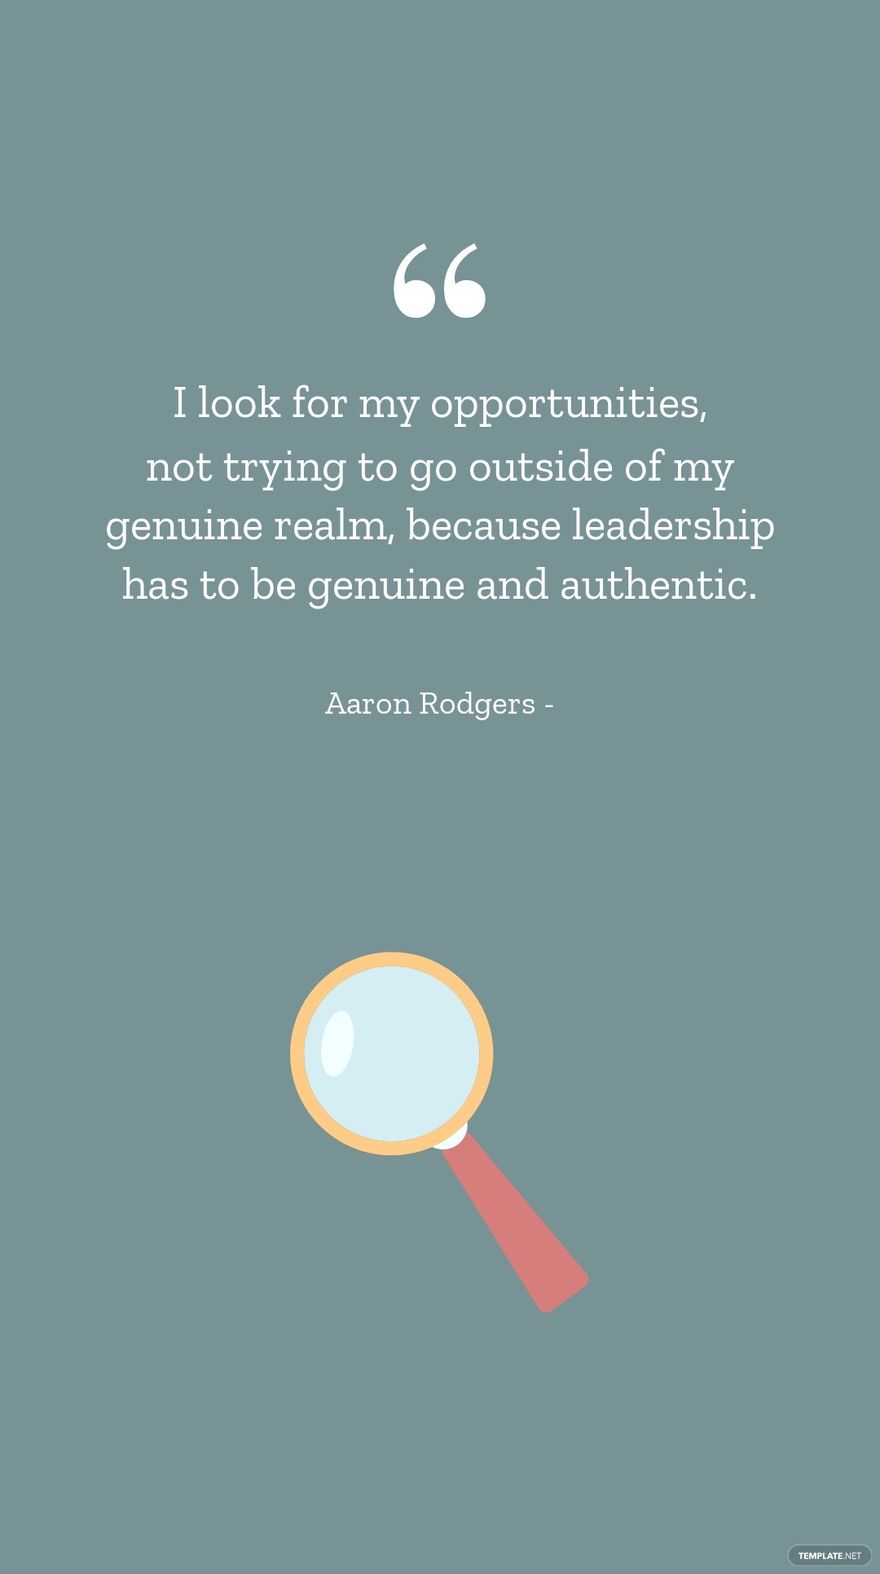 Free Aaron Rodgers - I look for my opportunities, not trying to go outside of my genuine realm, because leadership has to be genuine and authentic. in JPG